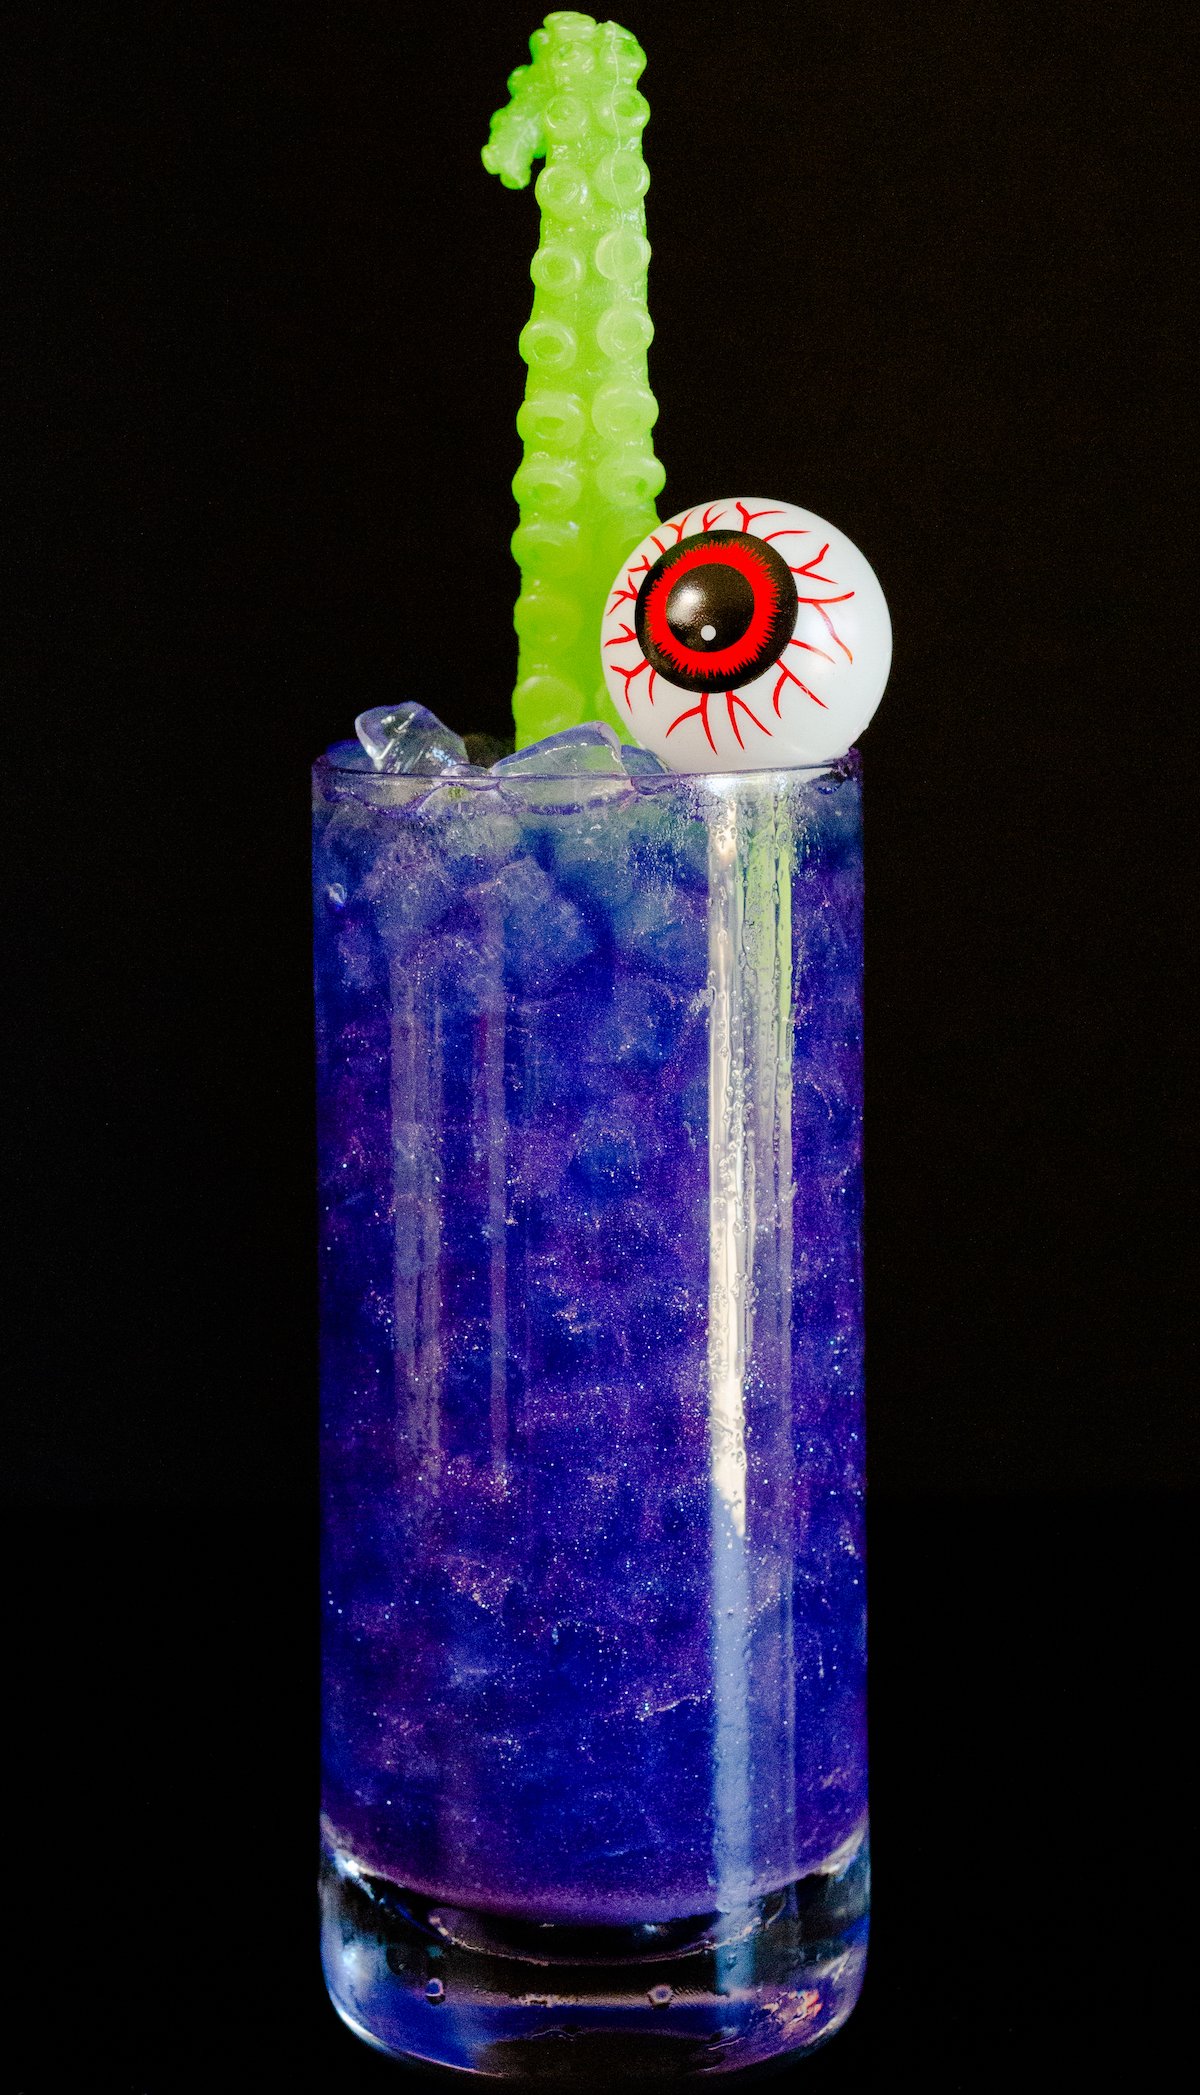 A highball glass filled with a bright shiny purple liquid sits on a black background. The drink is garnished with a green sea monster tentacle and plastic eyeball.